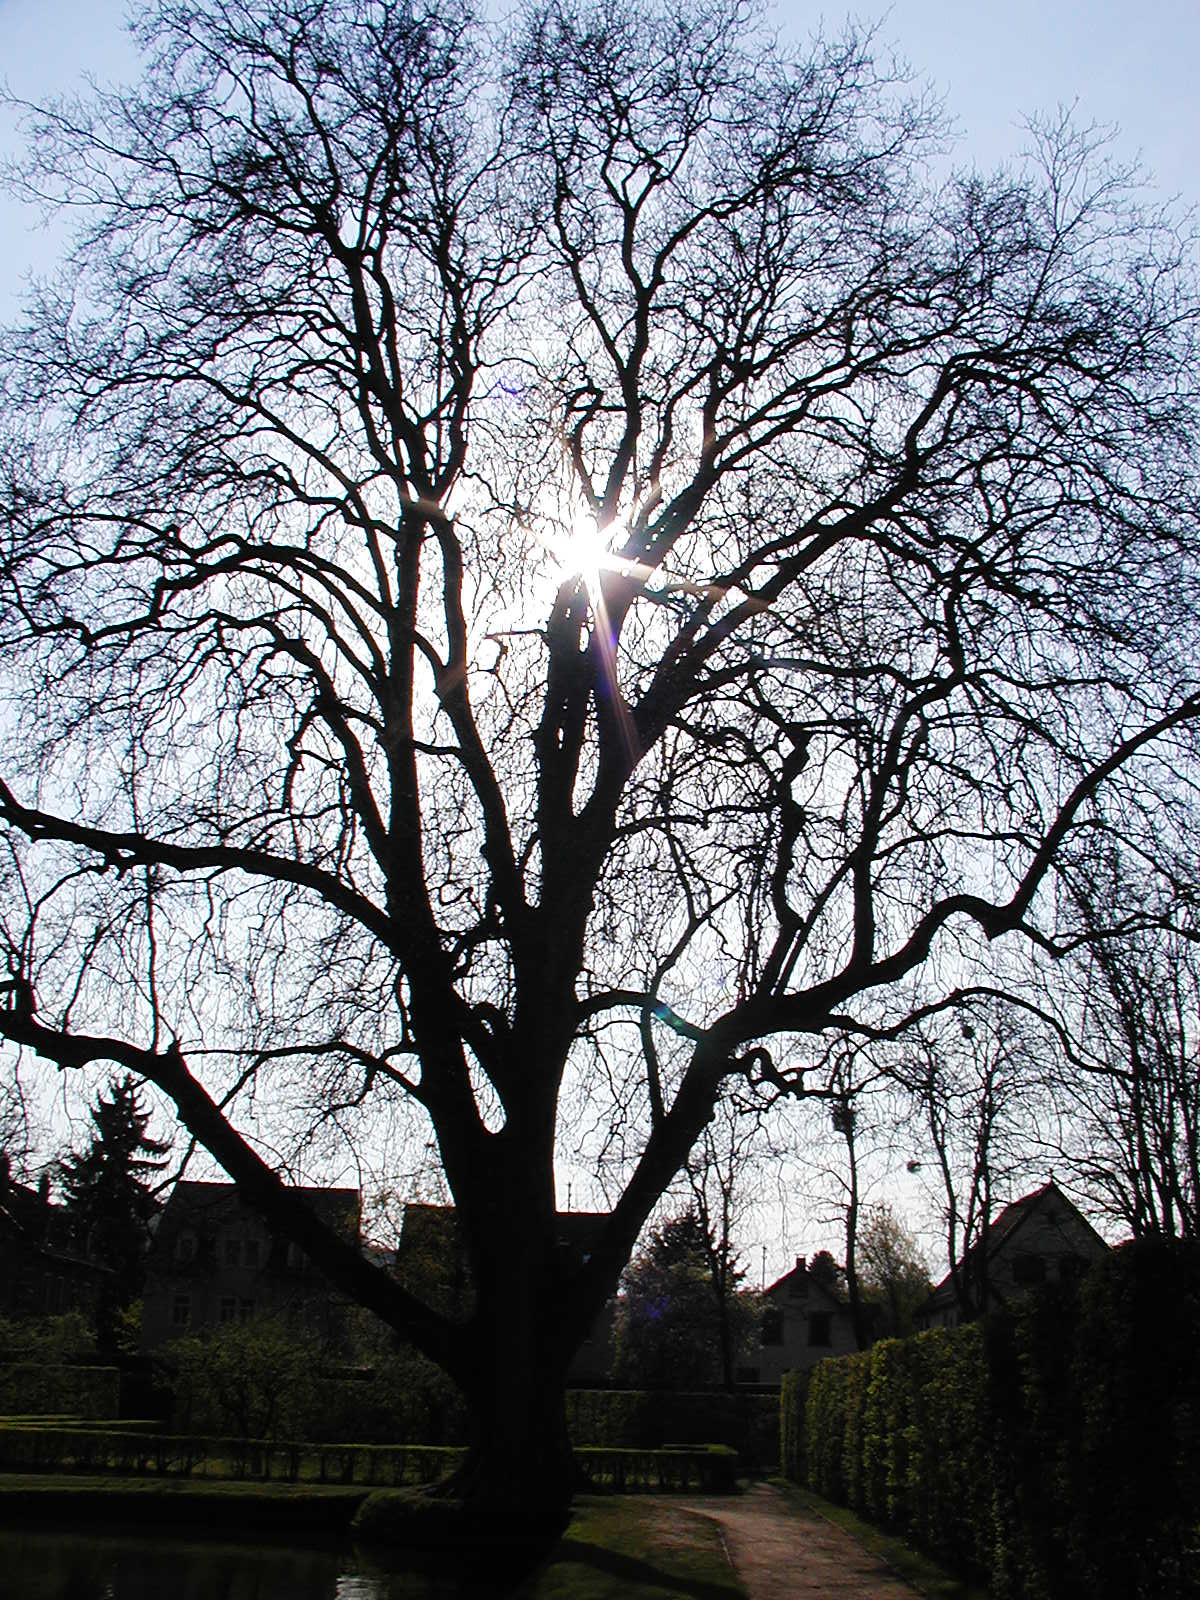 Bare tree, Bare, Branches, Sky, Tall, HQ Photo